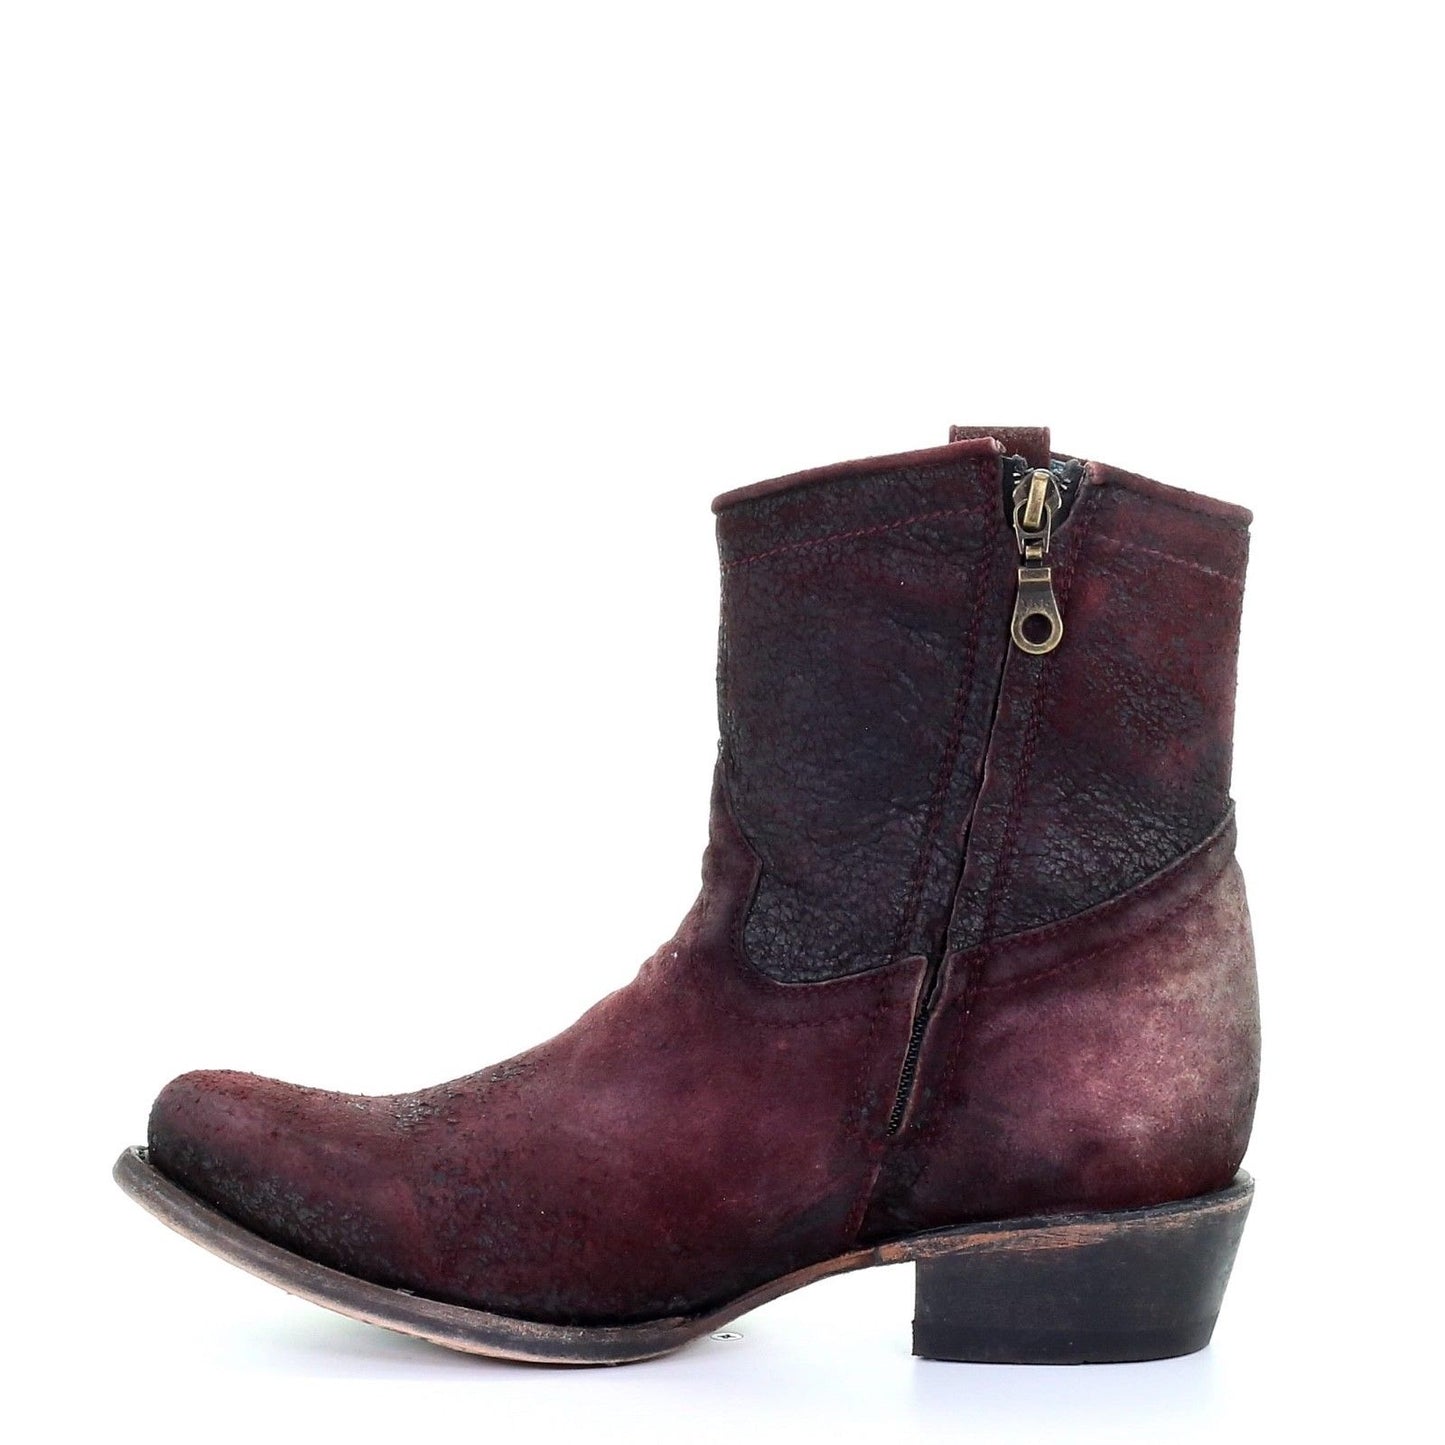 Corral Ladies Wine Red Lamb Round Toe Shortie Ankle Boots C3416